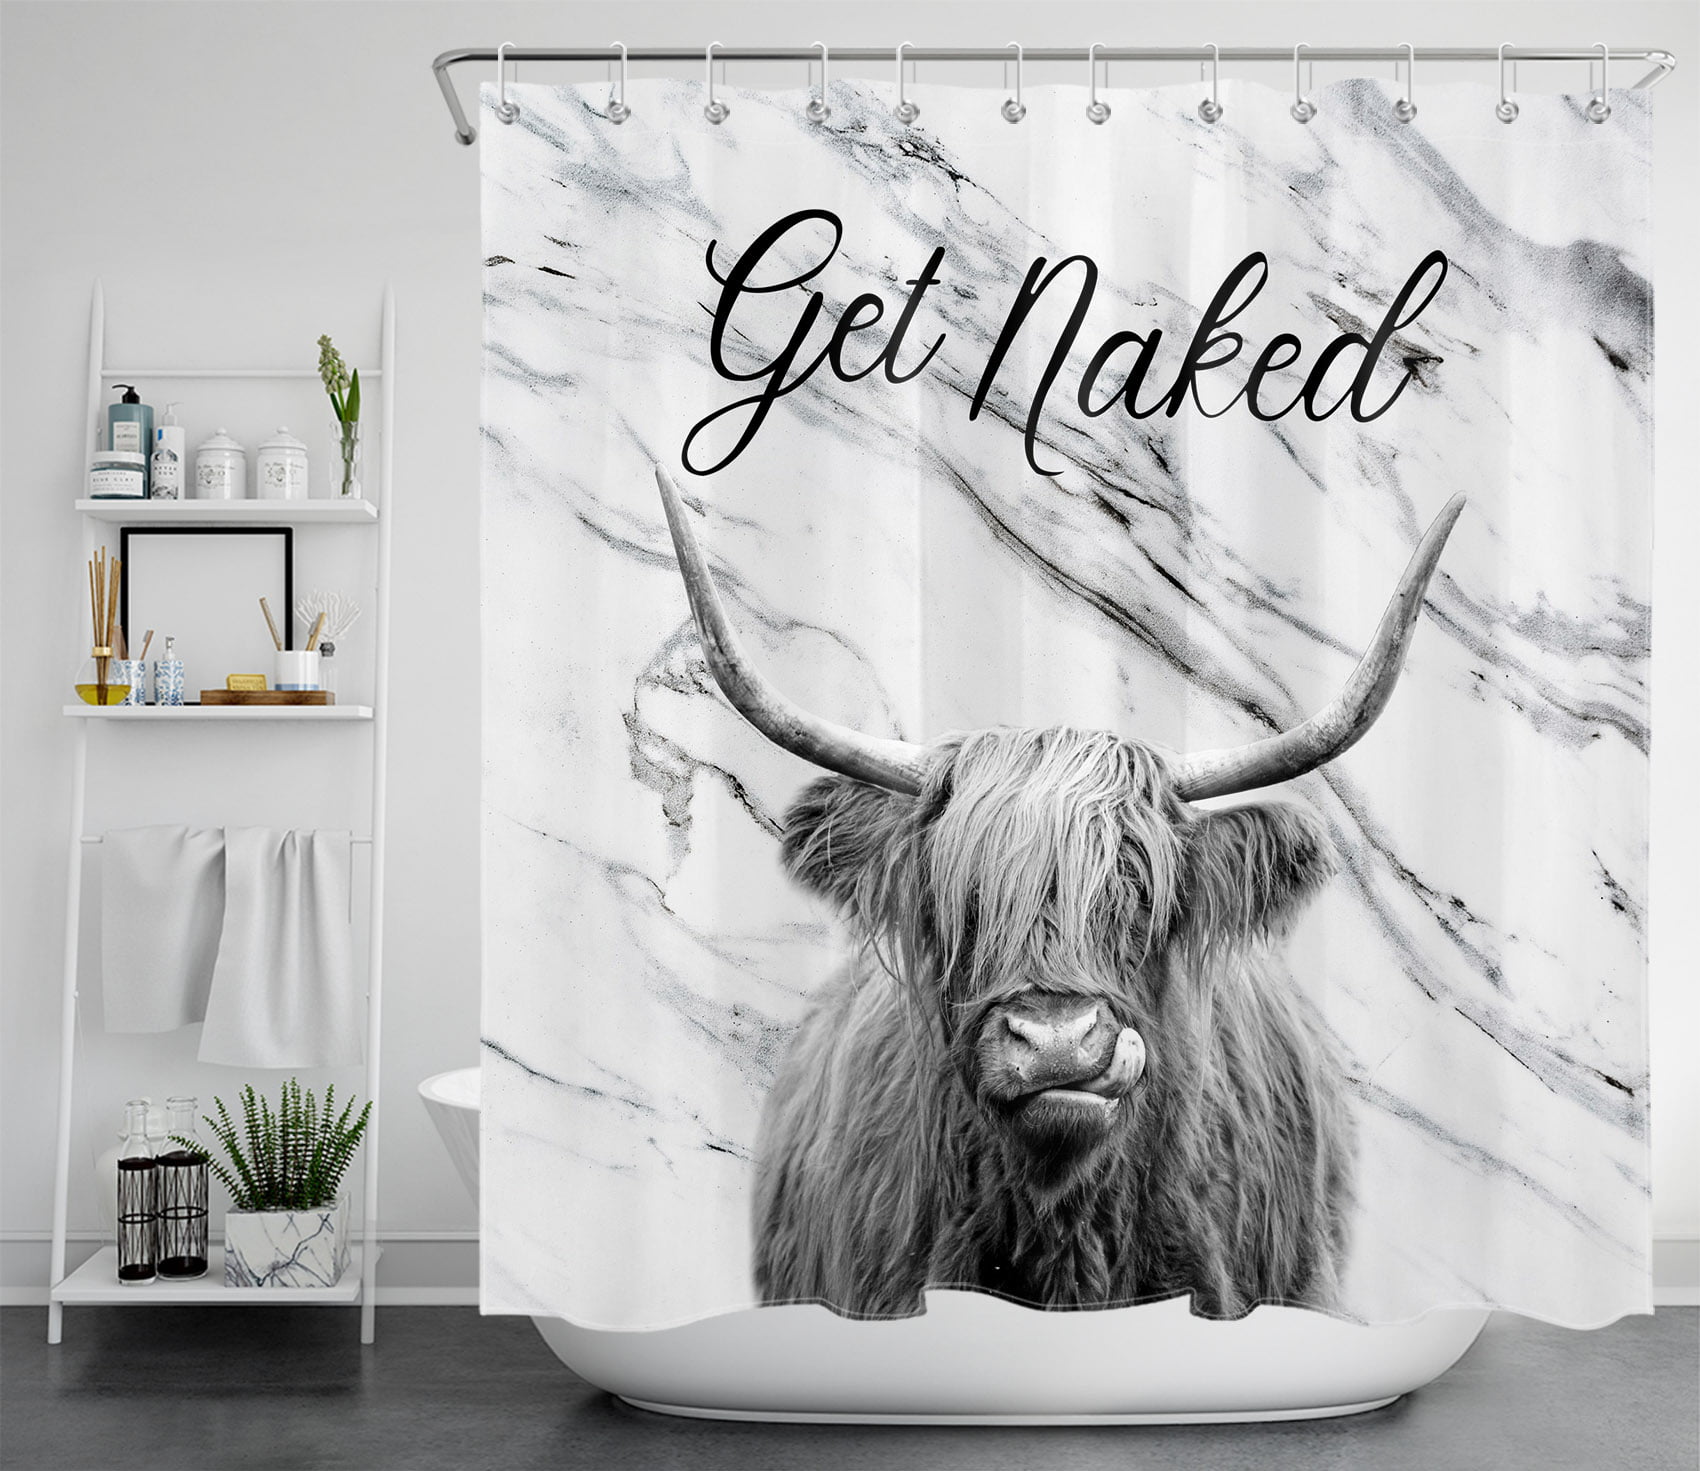 Funny Highland Cow Shower Curtain Abstract Marble Funny Get Naked Bathroom Set